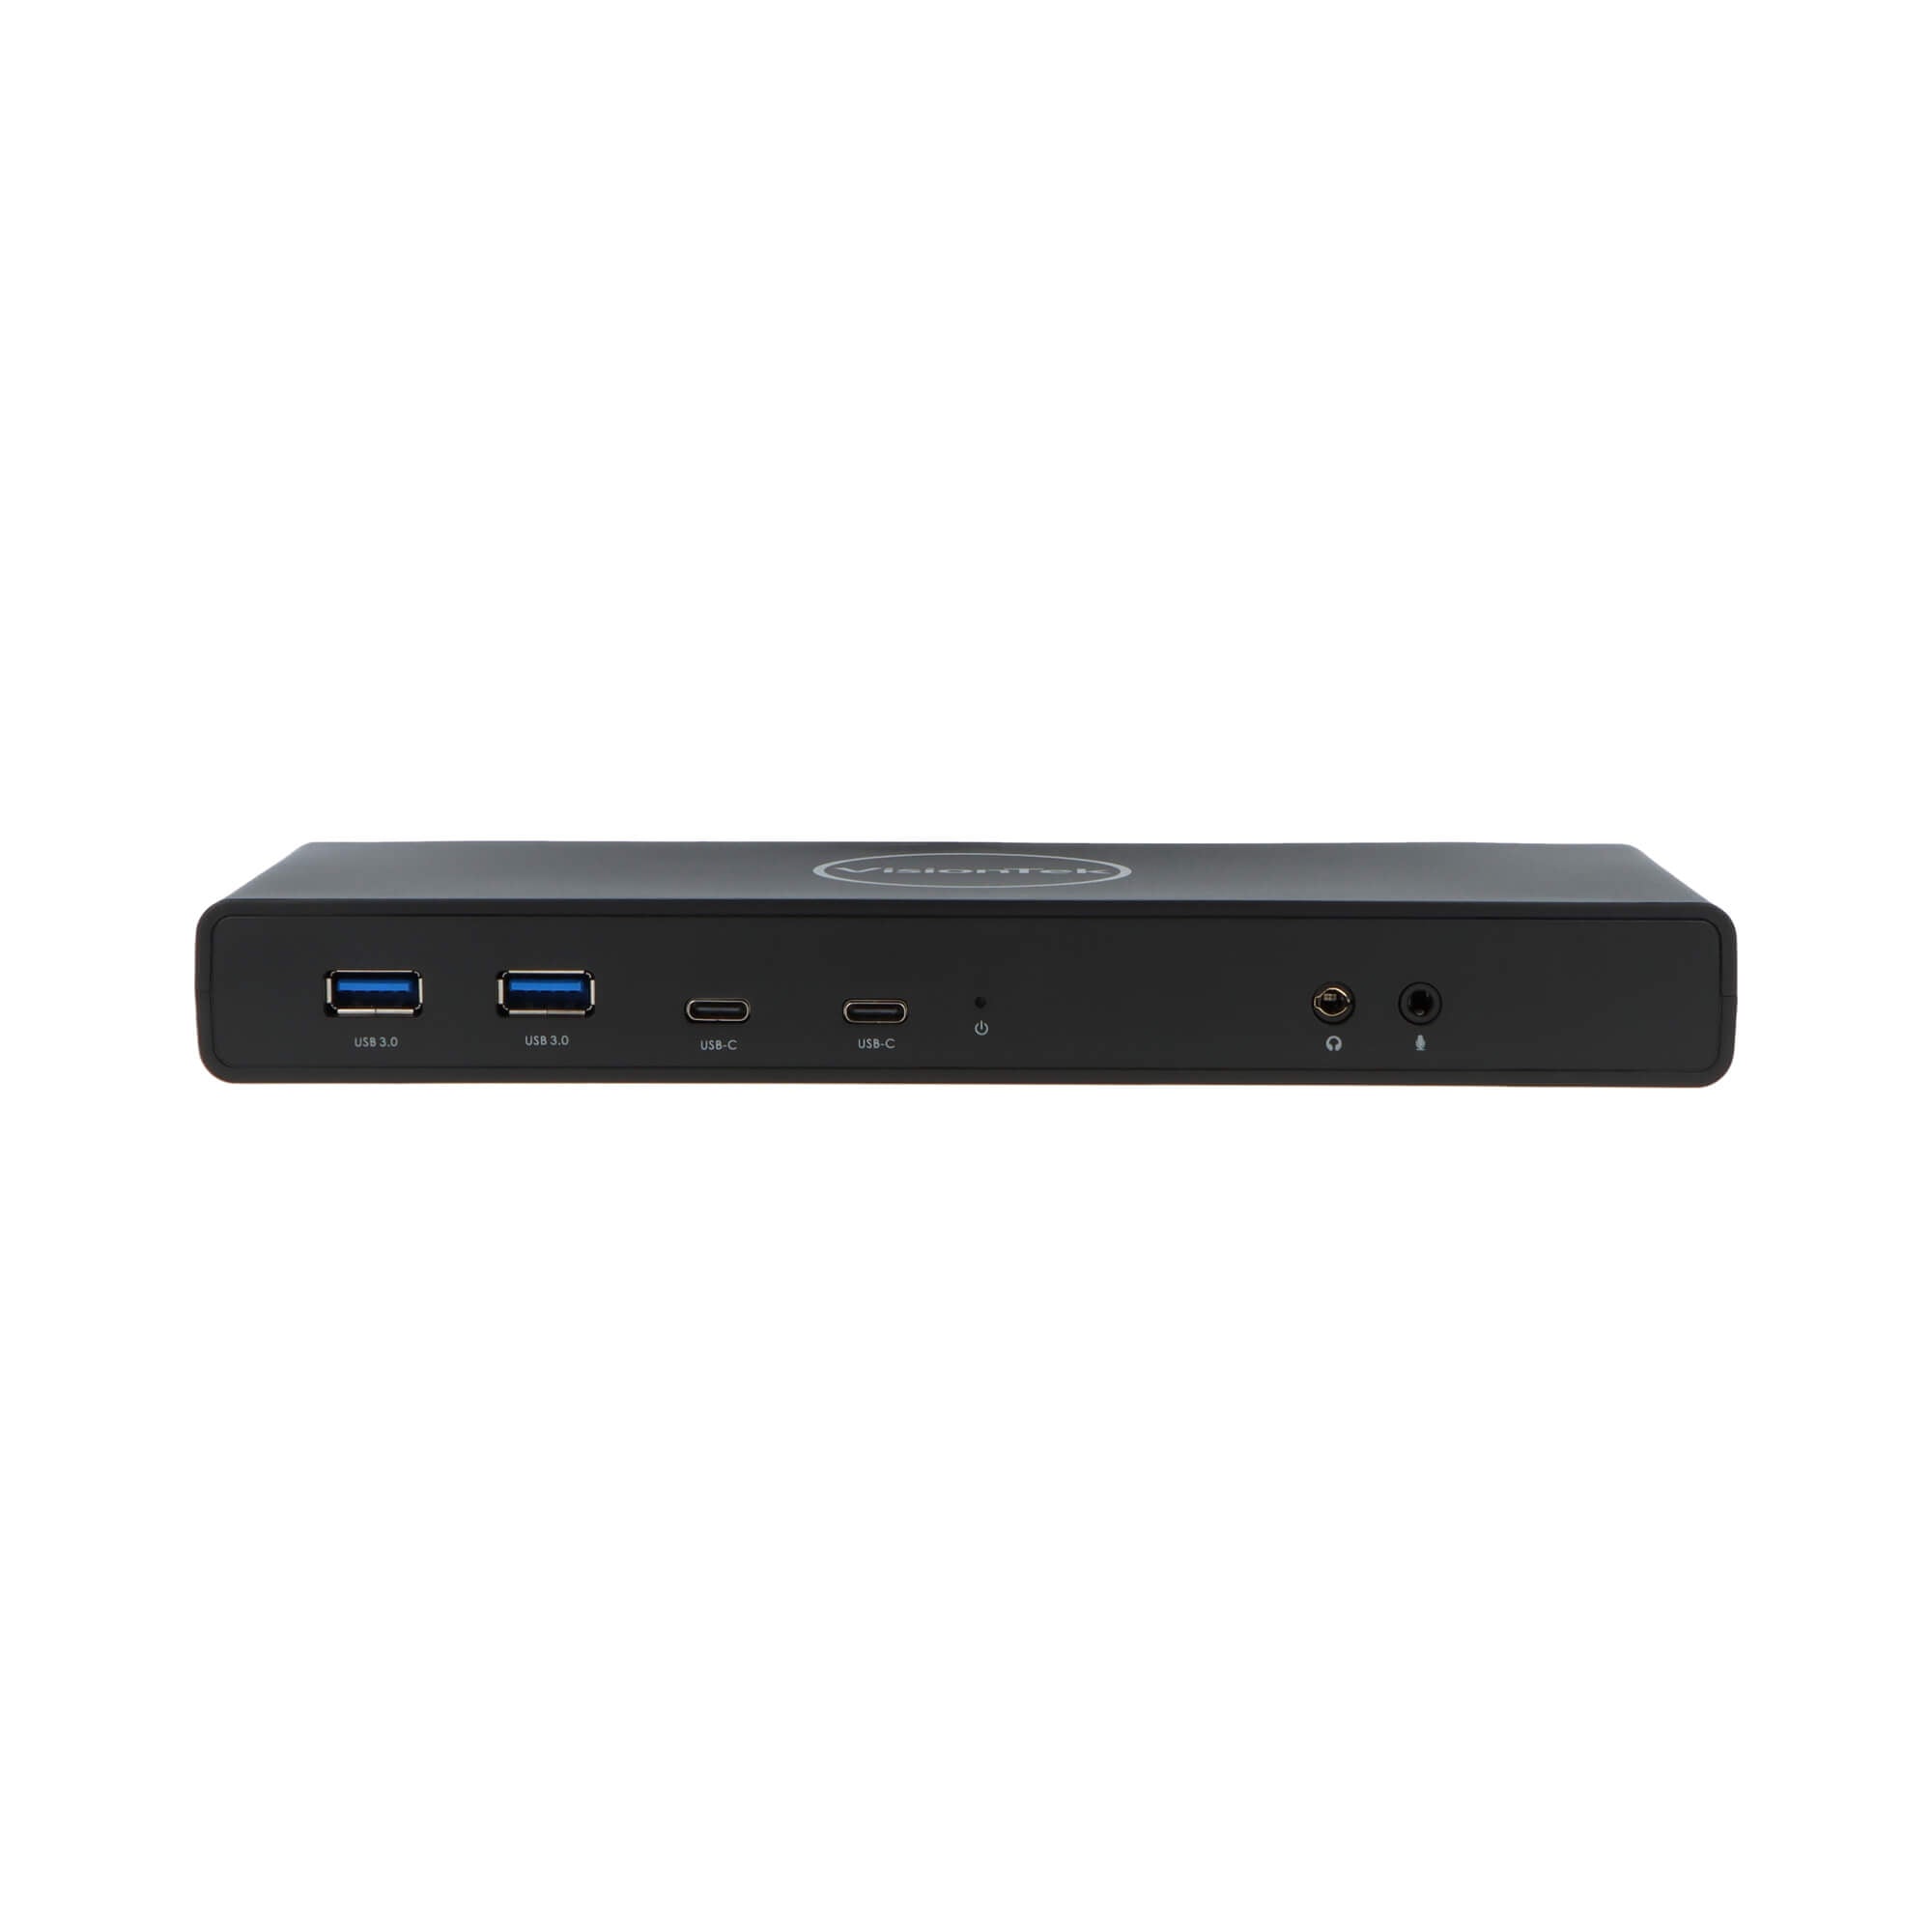 VT4500 Dual Display 4K USB 3.0 / USB-C Docking Station with Power Delivery